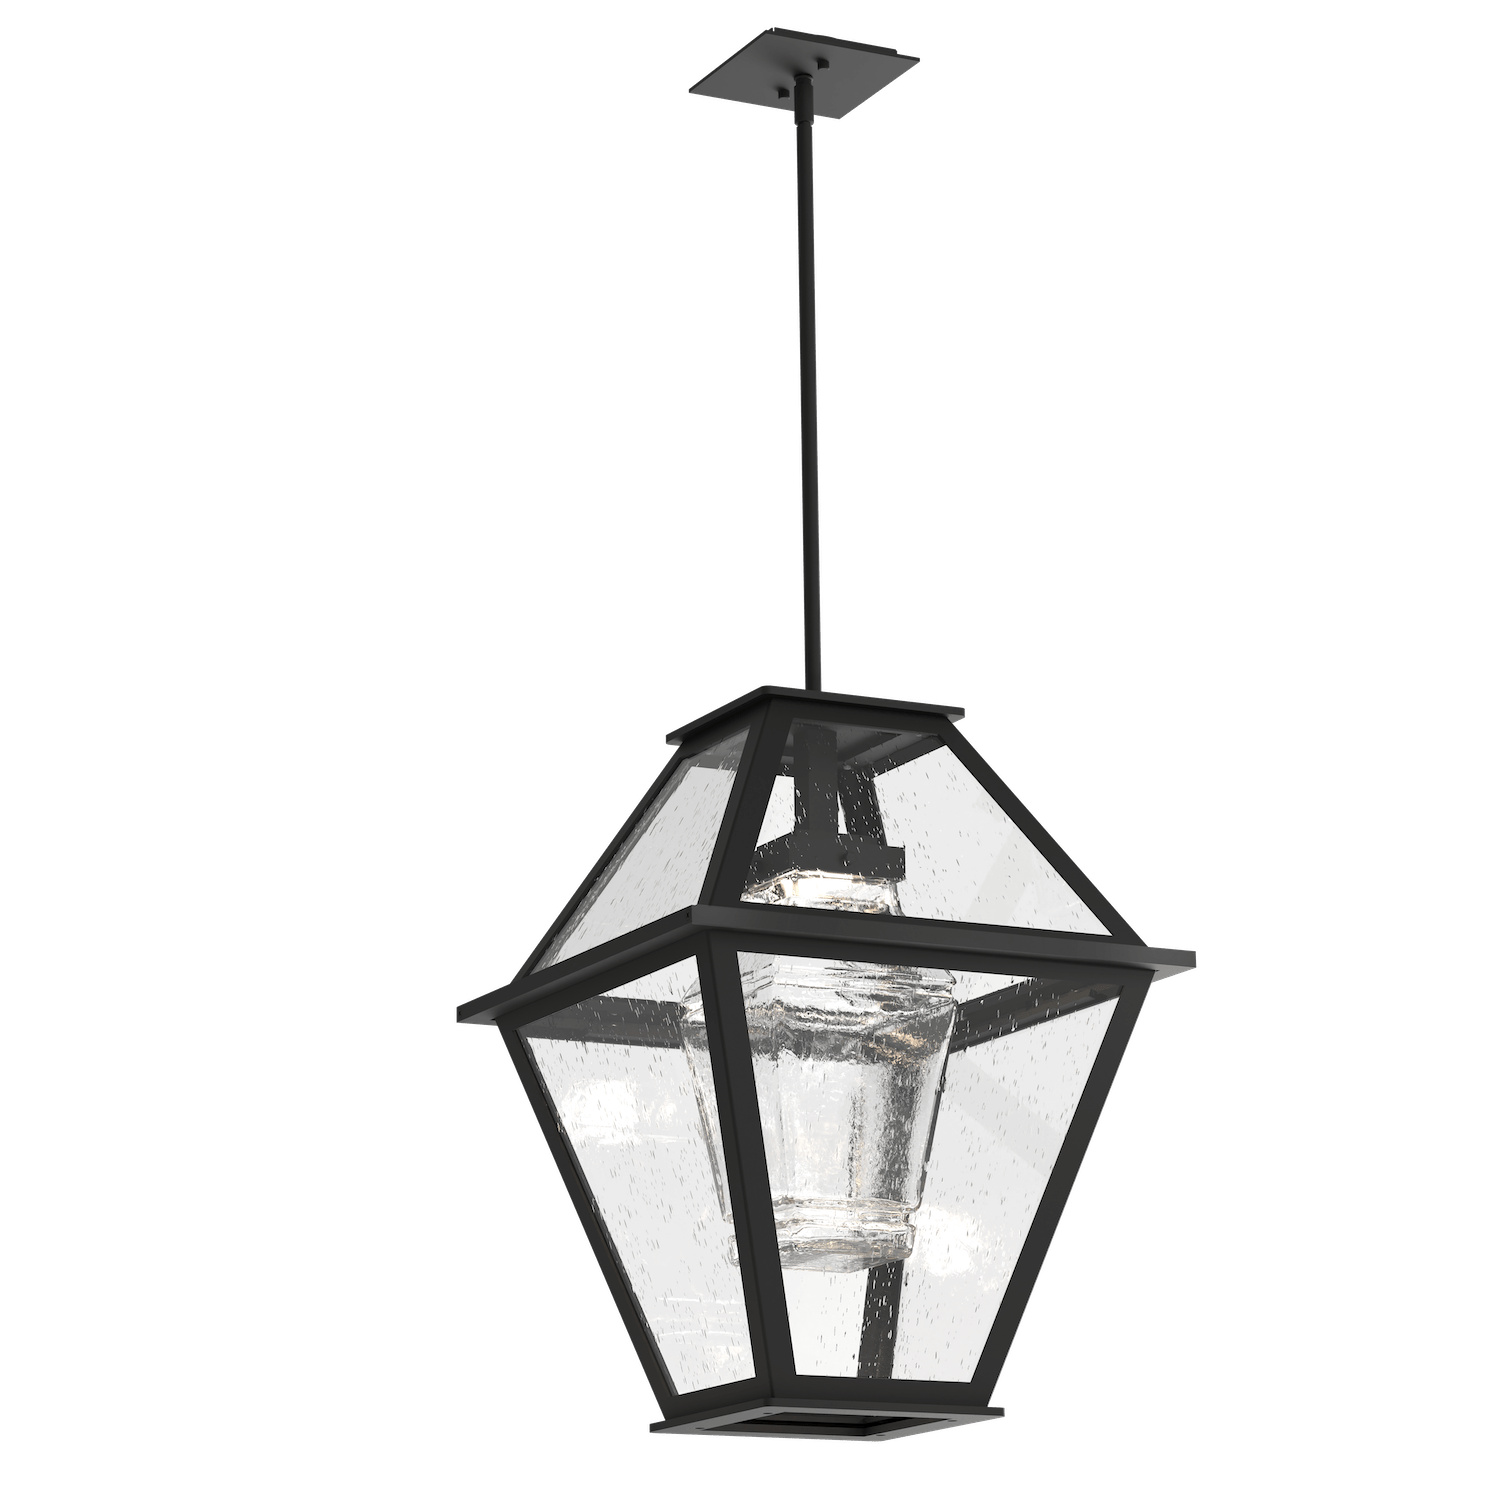 OPB0072-01-TB-C-Hammerton-Studio-Terrace-24-inch-outdoor-nested-pendant-light-with-textured-black-finish-and-clear-blown-glass-shades-and-LED-lamping